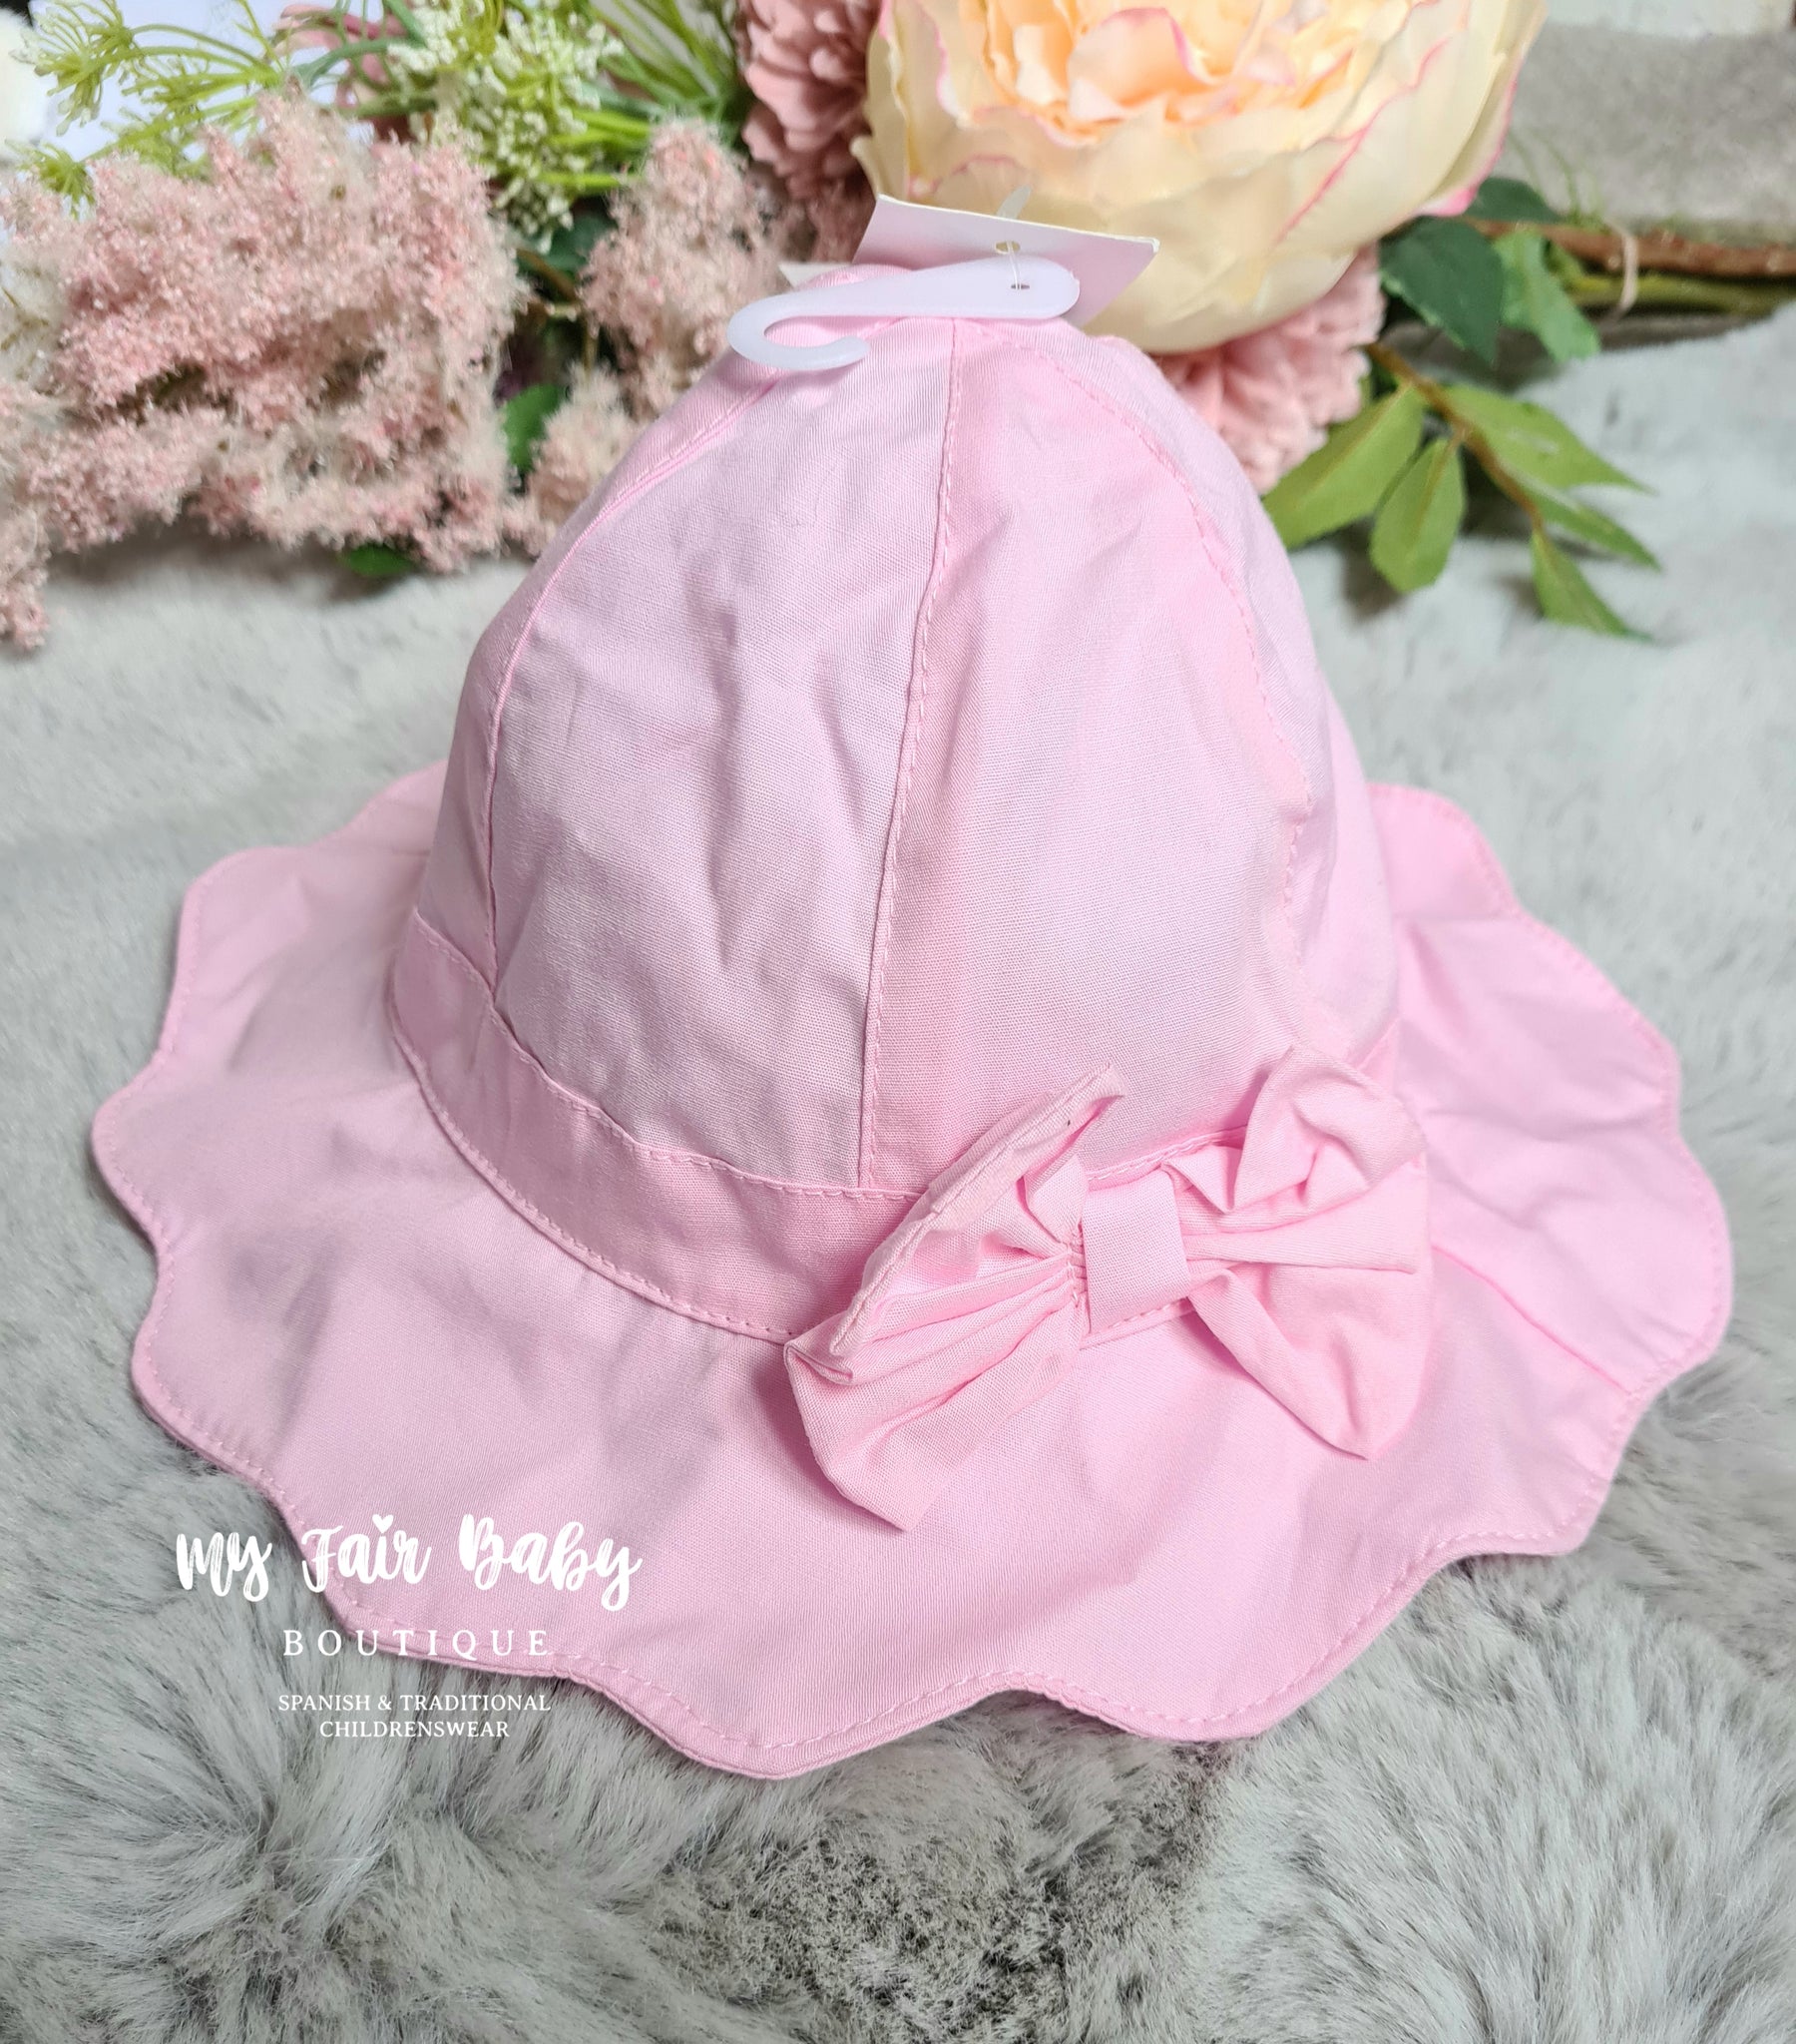 Traditional Baby Girls Bow Sun Hat - Pink or White